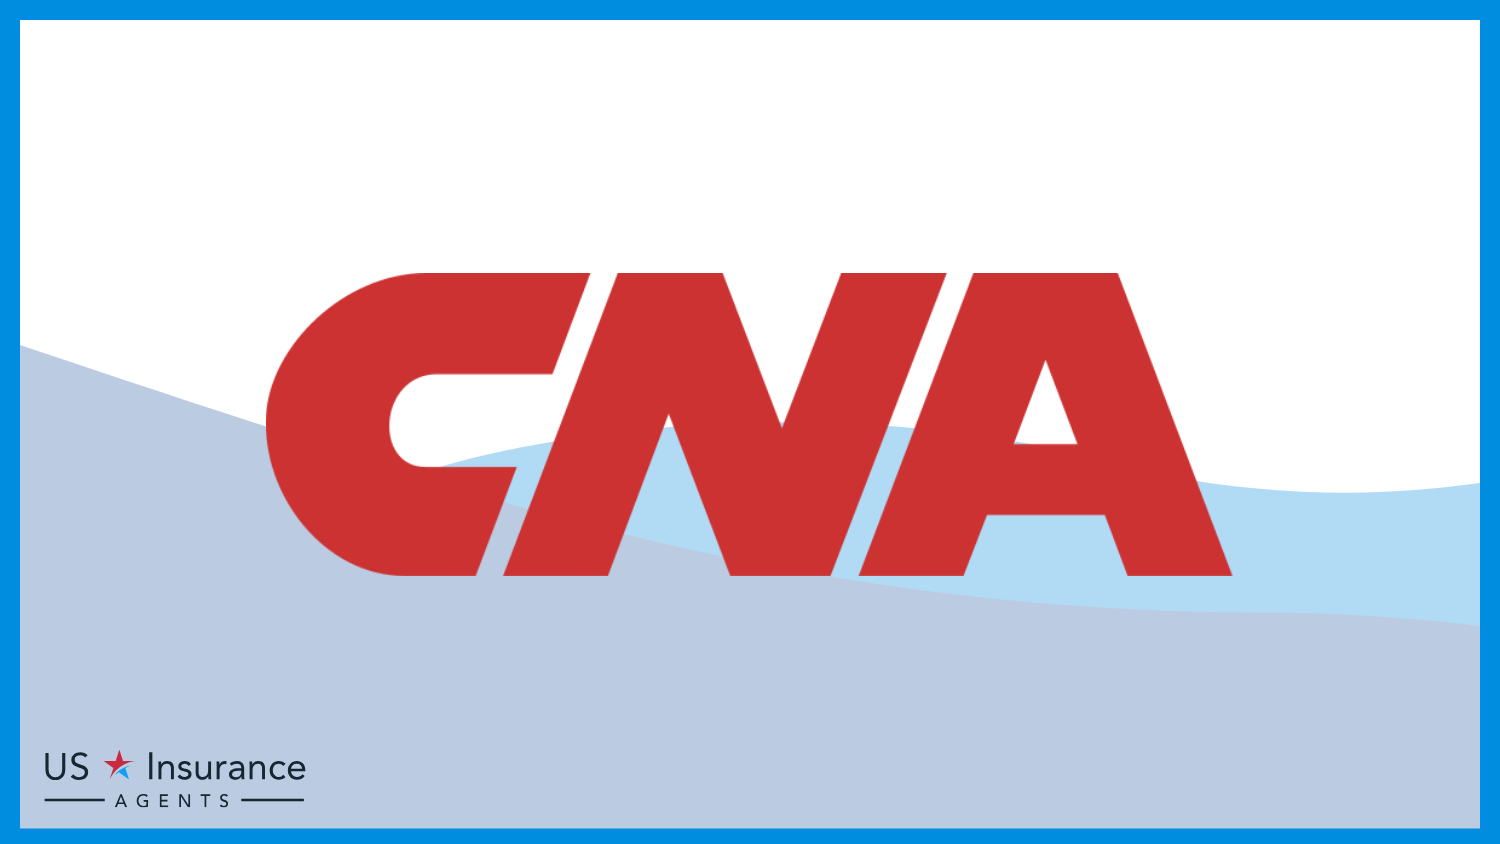 CNA: Best Business Insurance for IT Companies